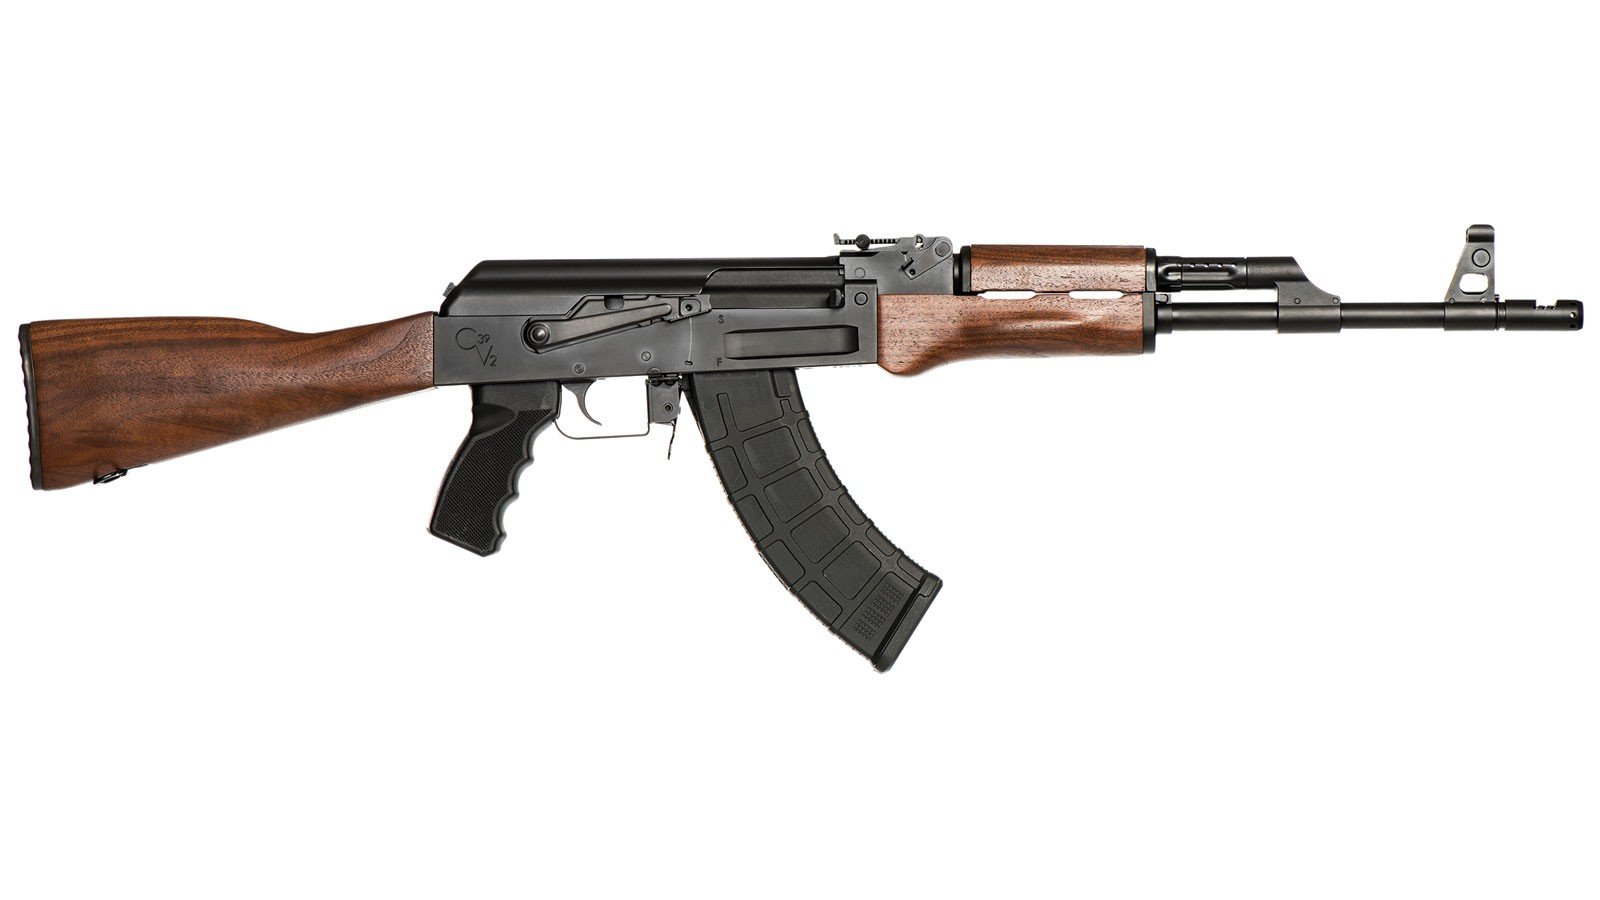 7-best-ak-47-and-its-versions-2022-review-gun-of-war